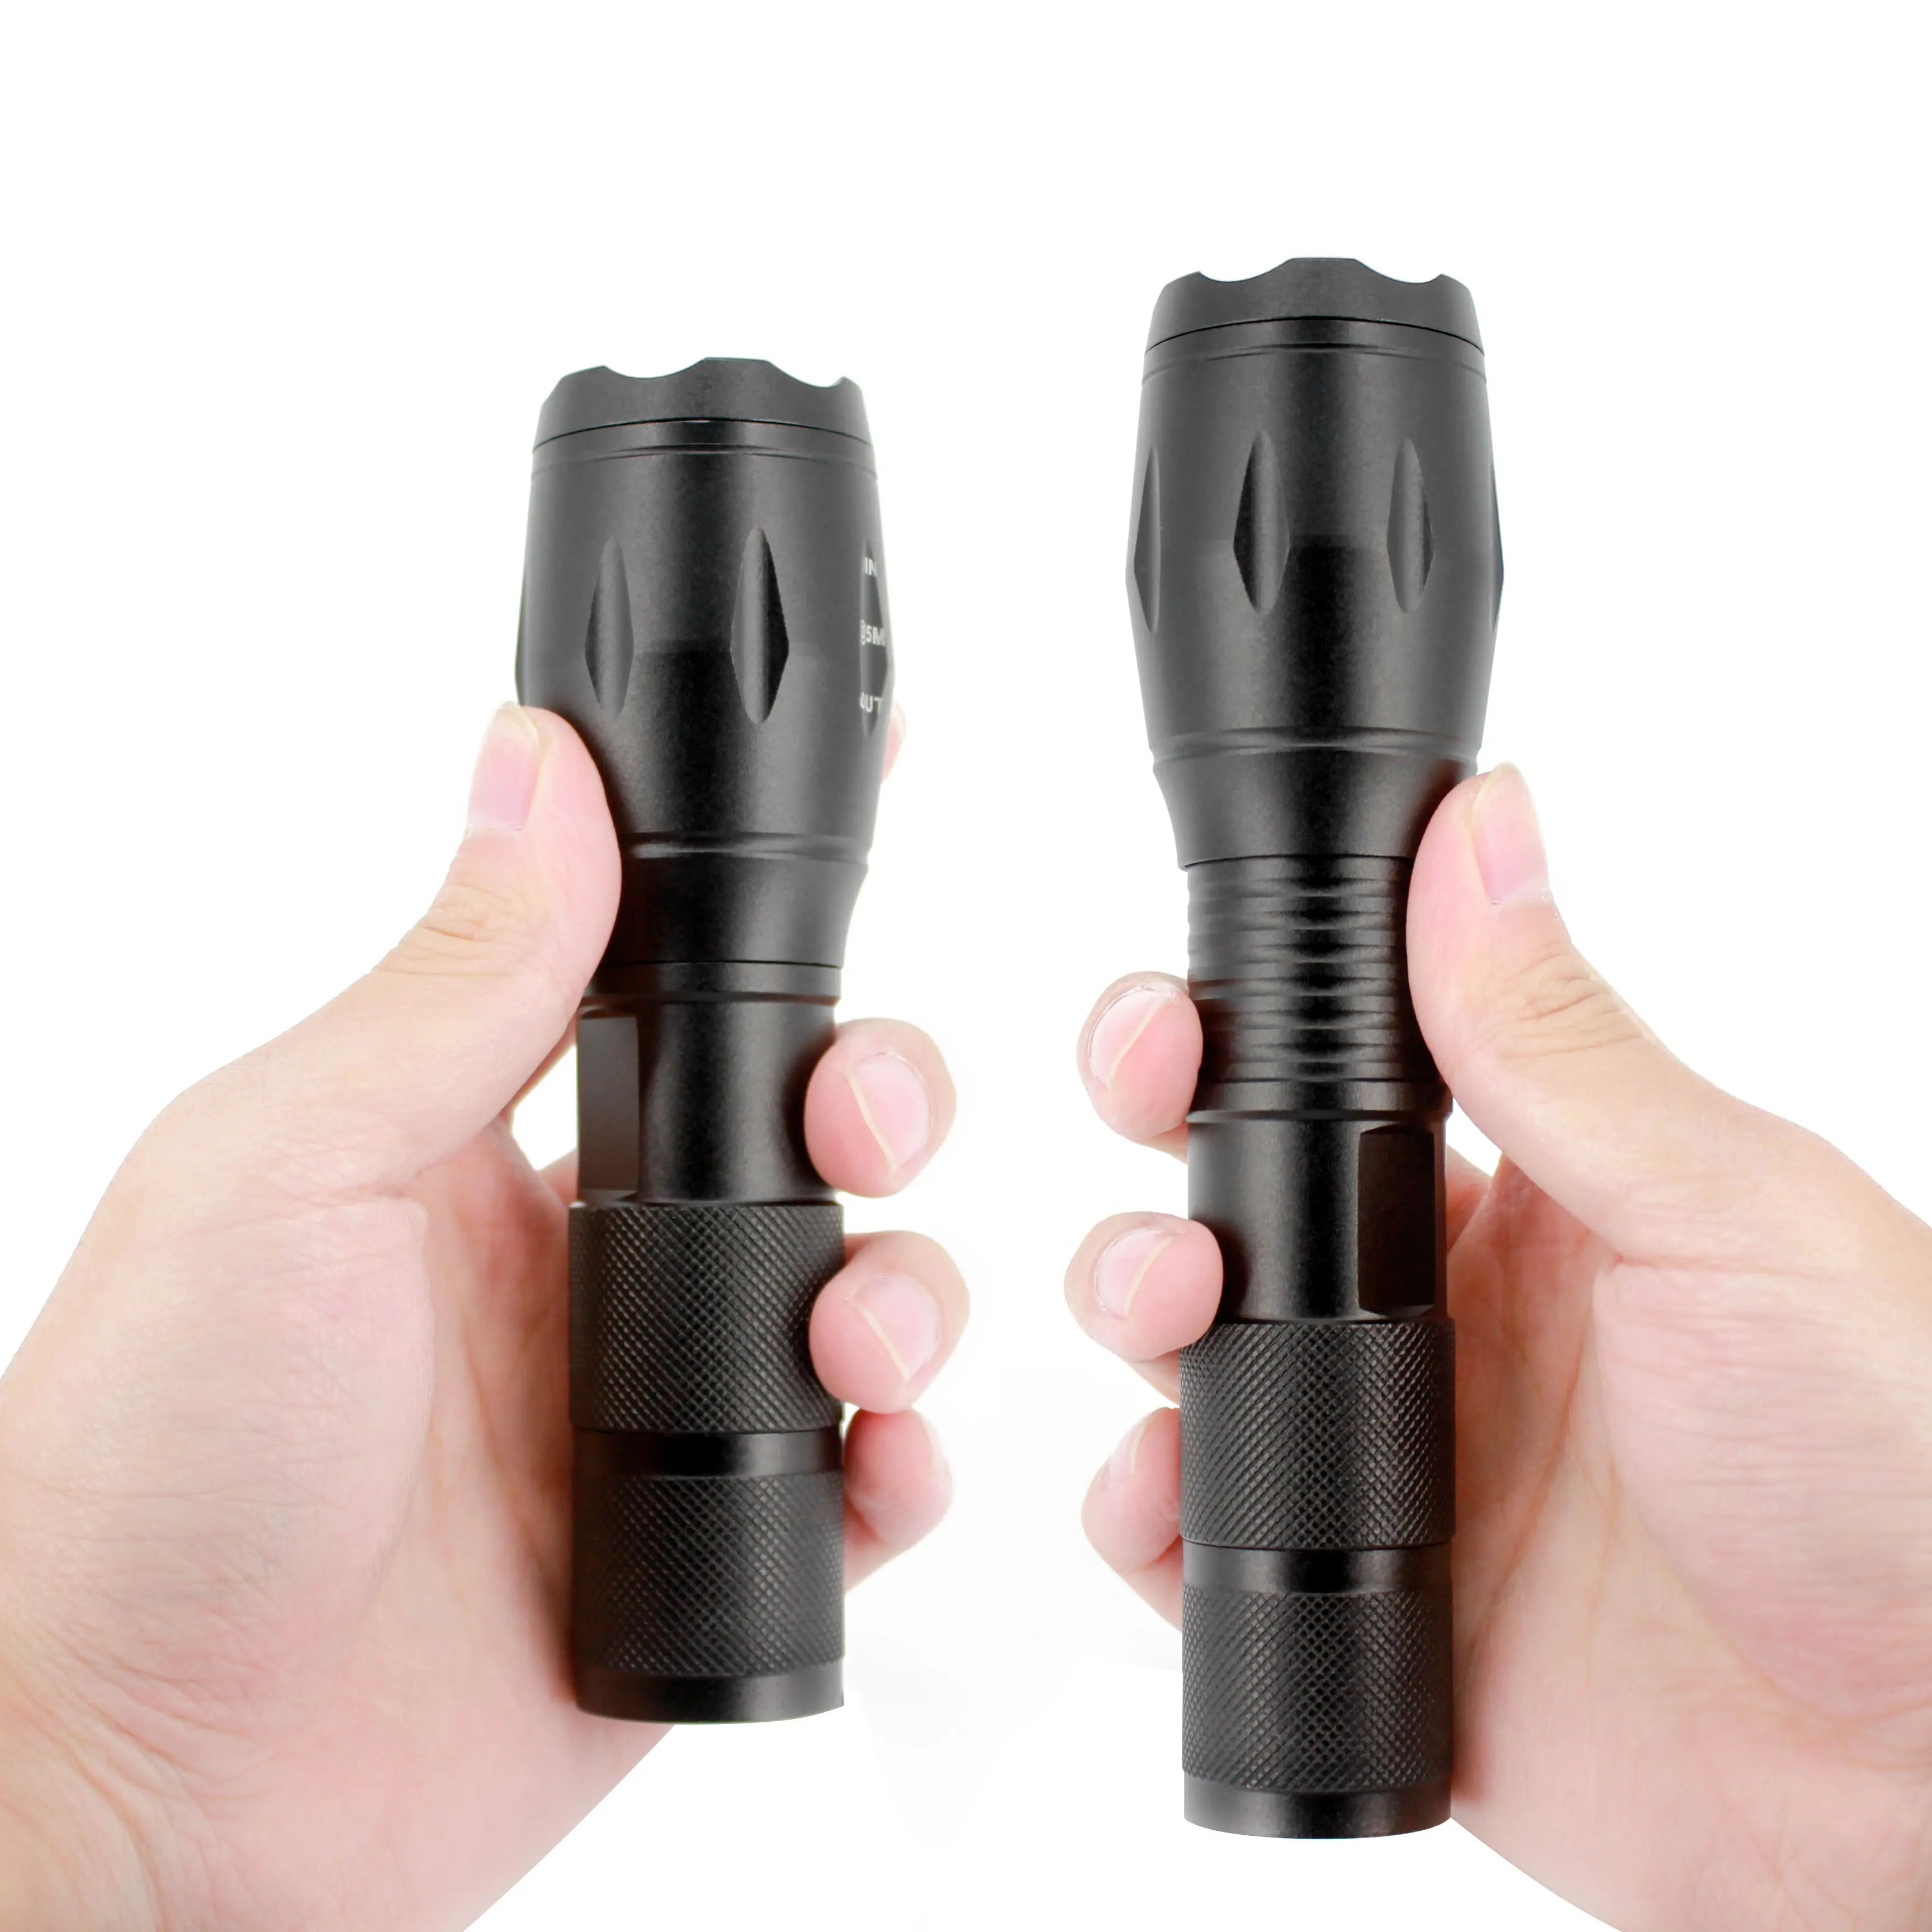 Ultra Bright T6 Waterproof Adjust Focus Zoomable Torch Light 5 Modes SOS Tactical LED Flashlight